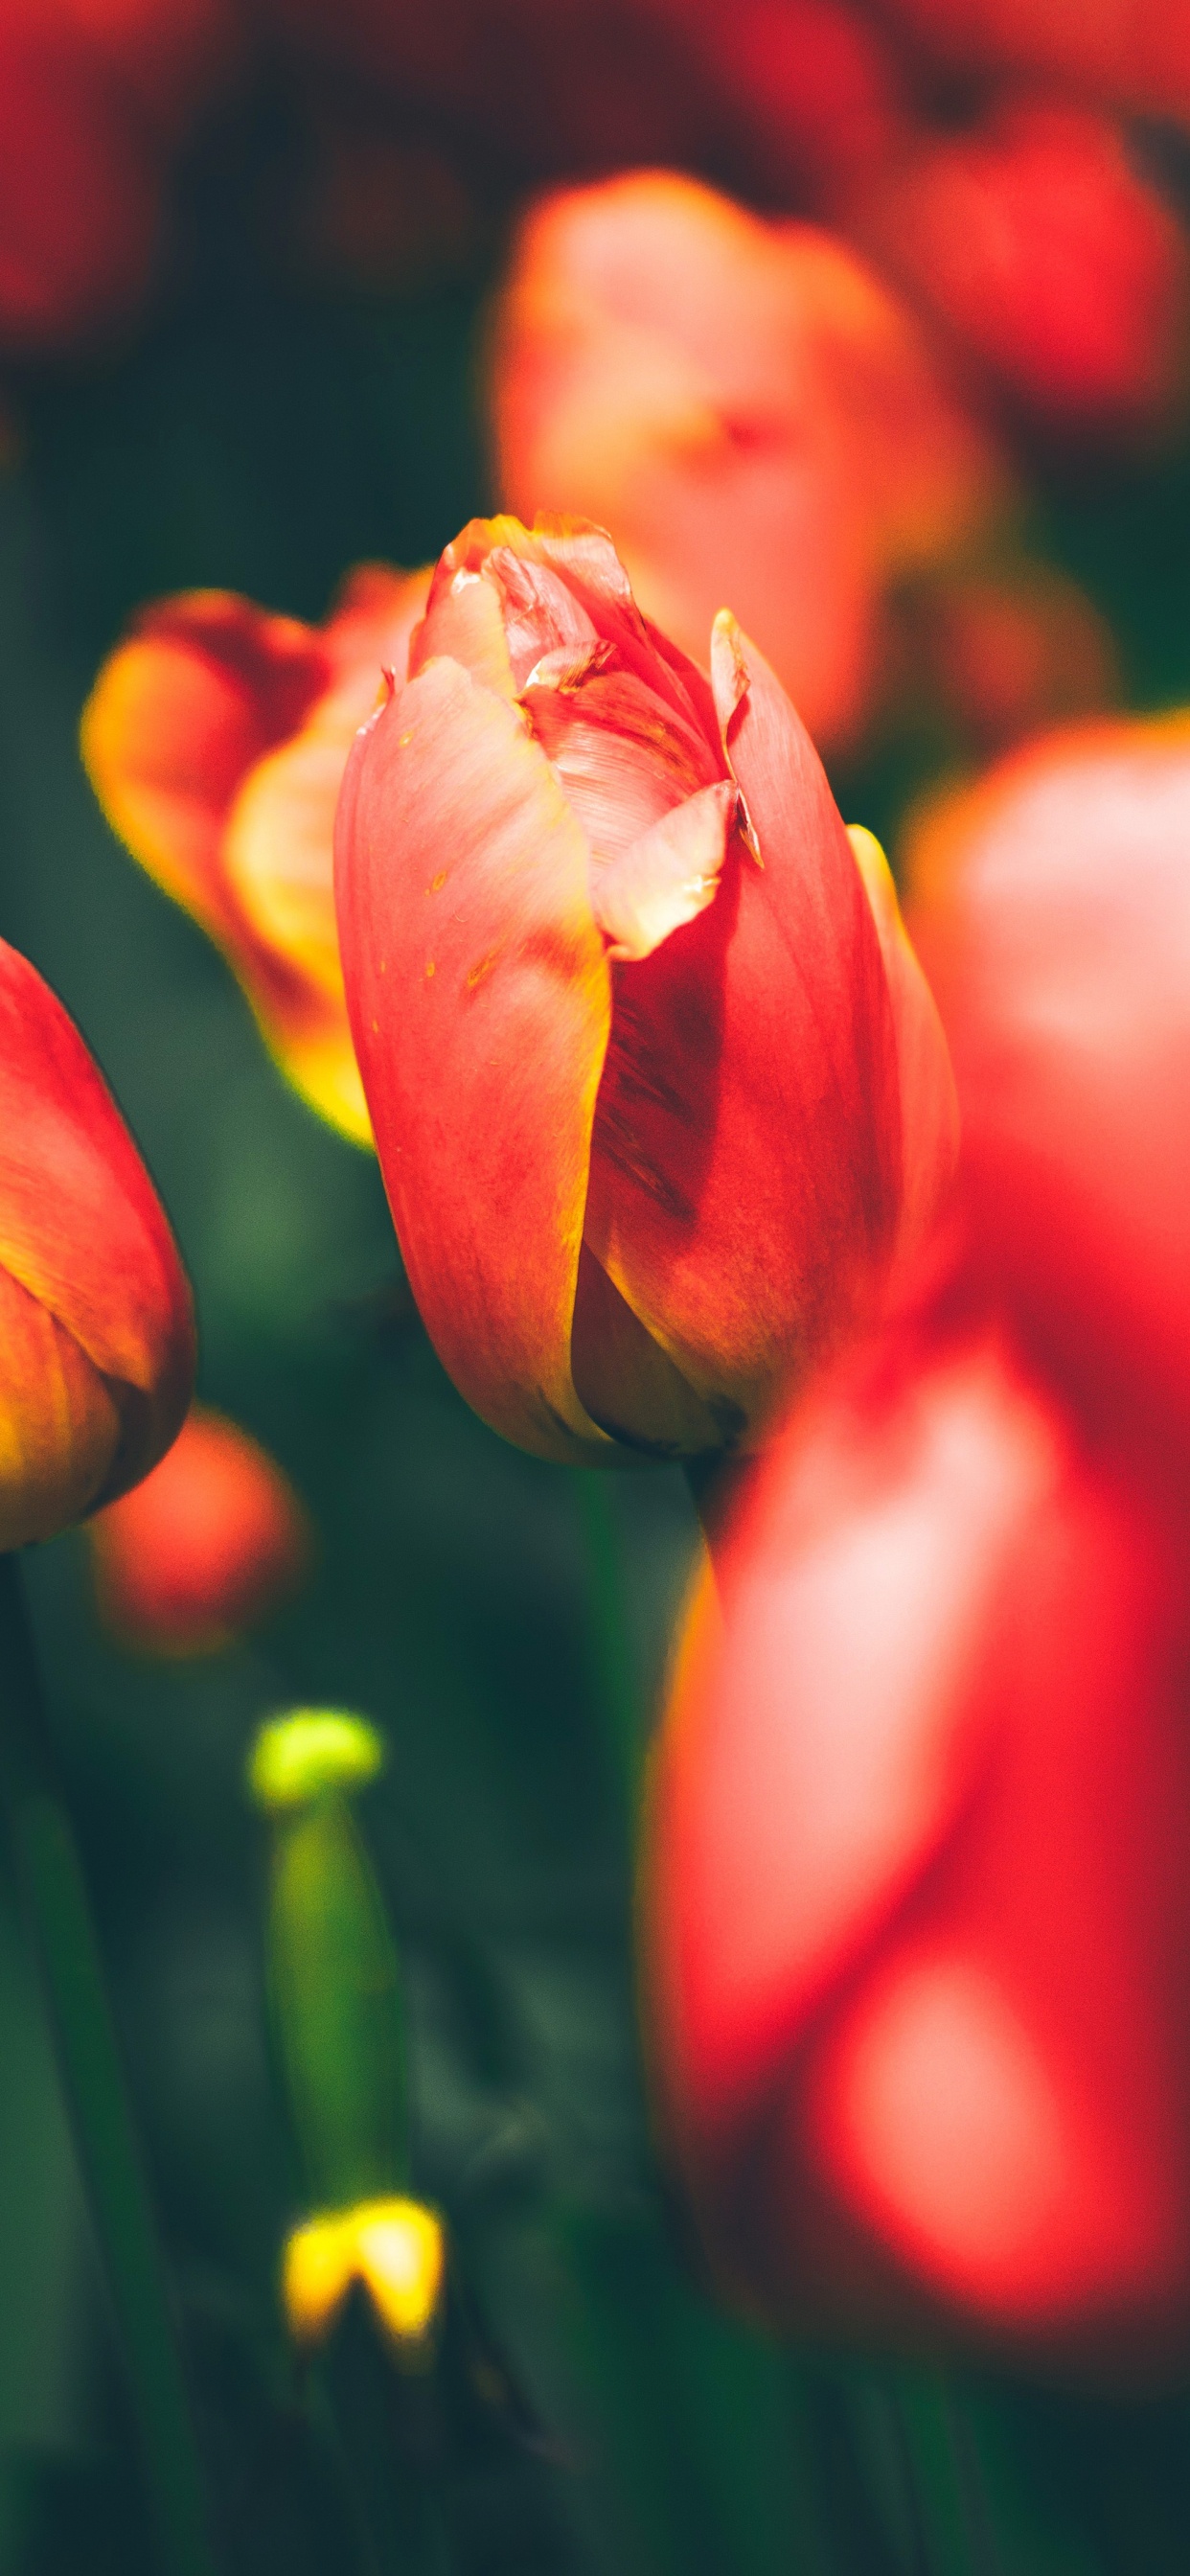 Red Tulips in Bloom During Daytime. Wallpaper in 1242x2688 Resolution